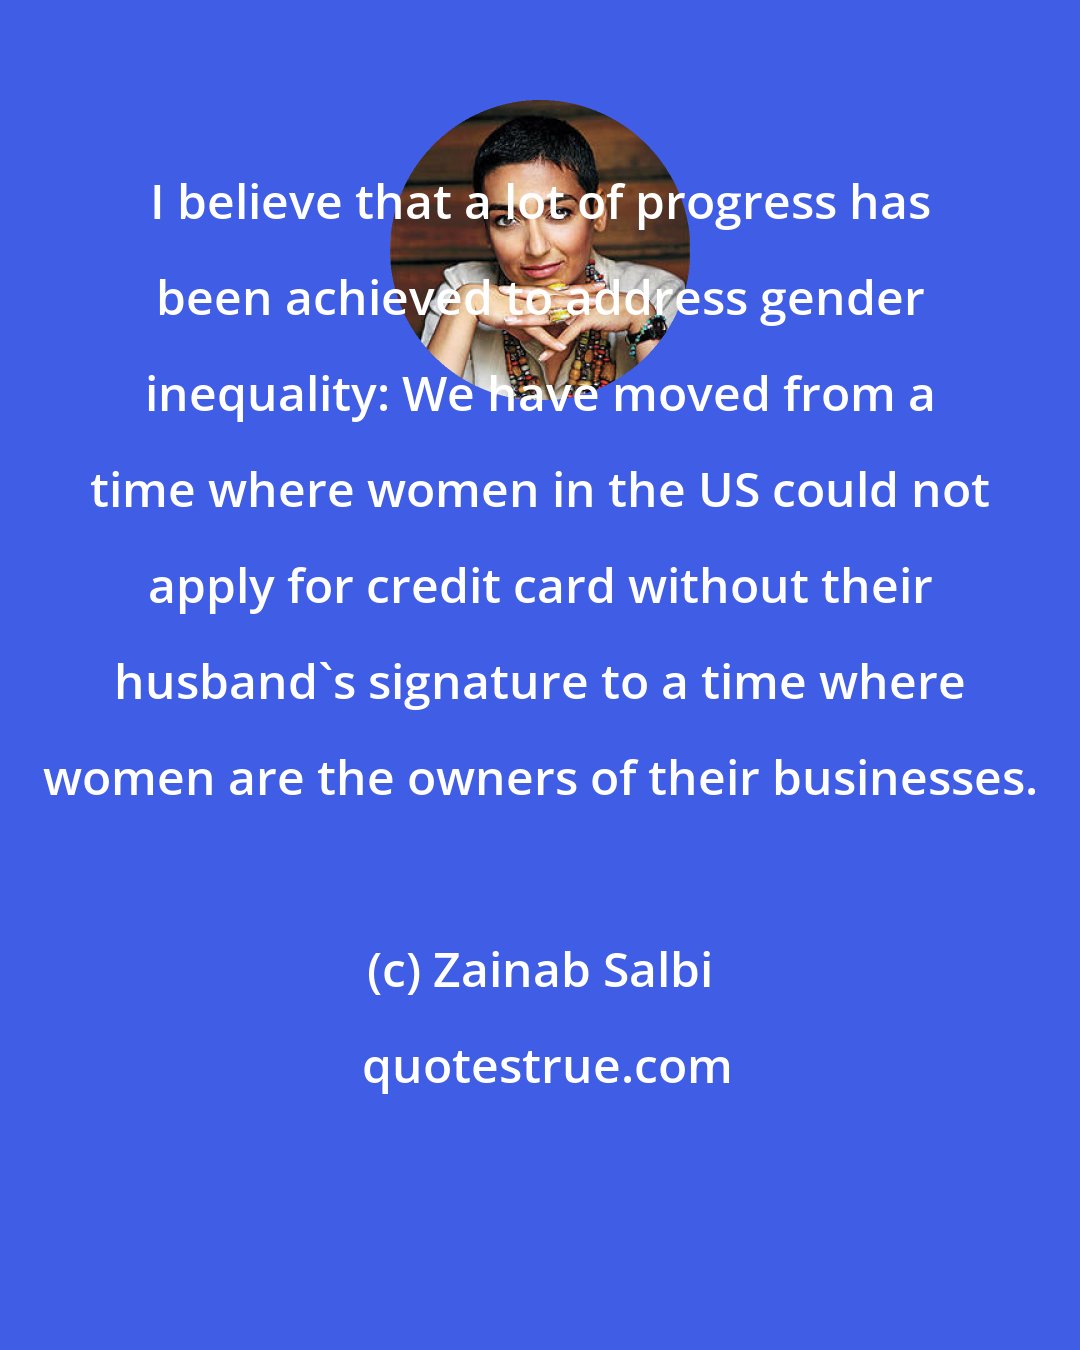 Zainab Salbi: I believe that a lot of progress has been achieved to address gender inequality: We have moved from a time where women in the US could not apply for credit card without their husband's signature to a time where women are the owners of their businesses.